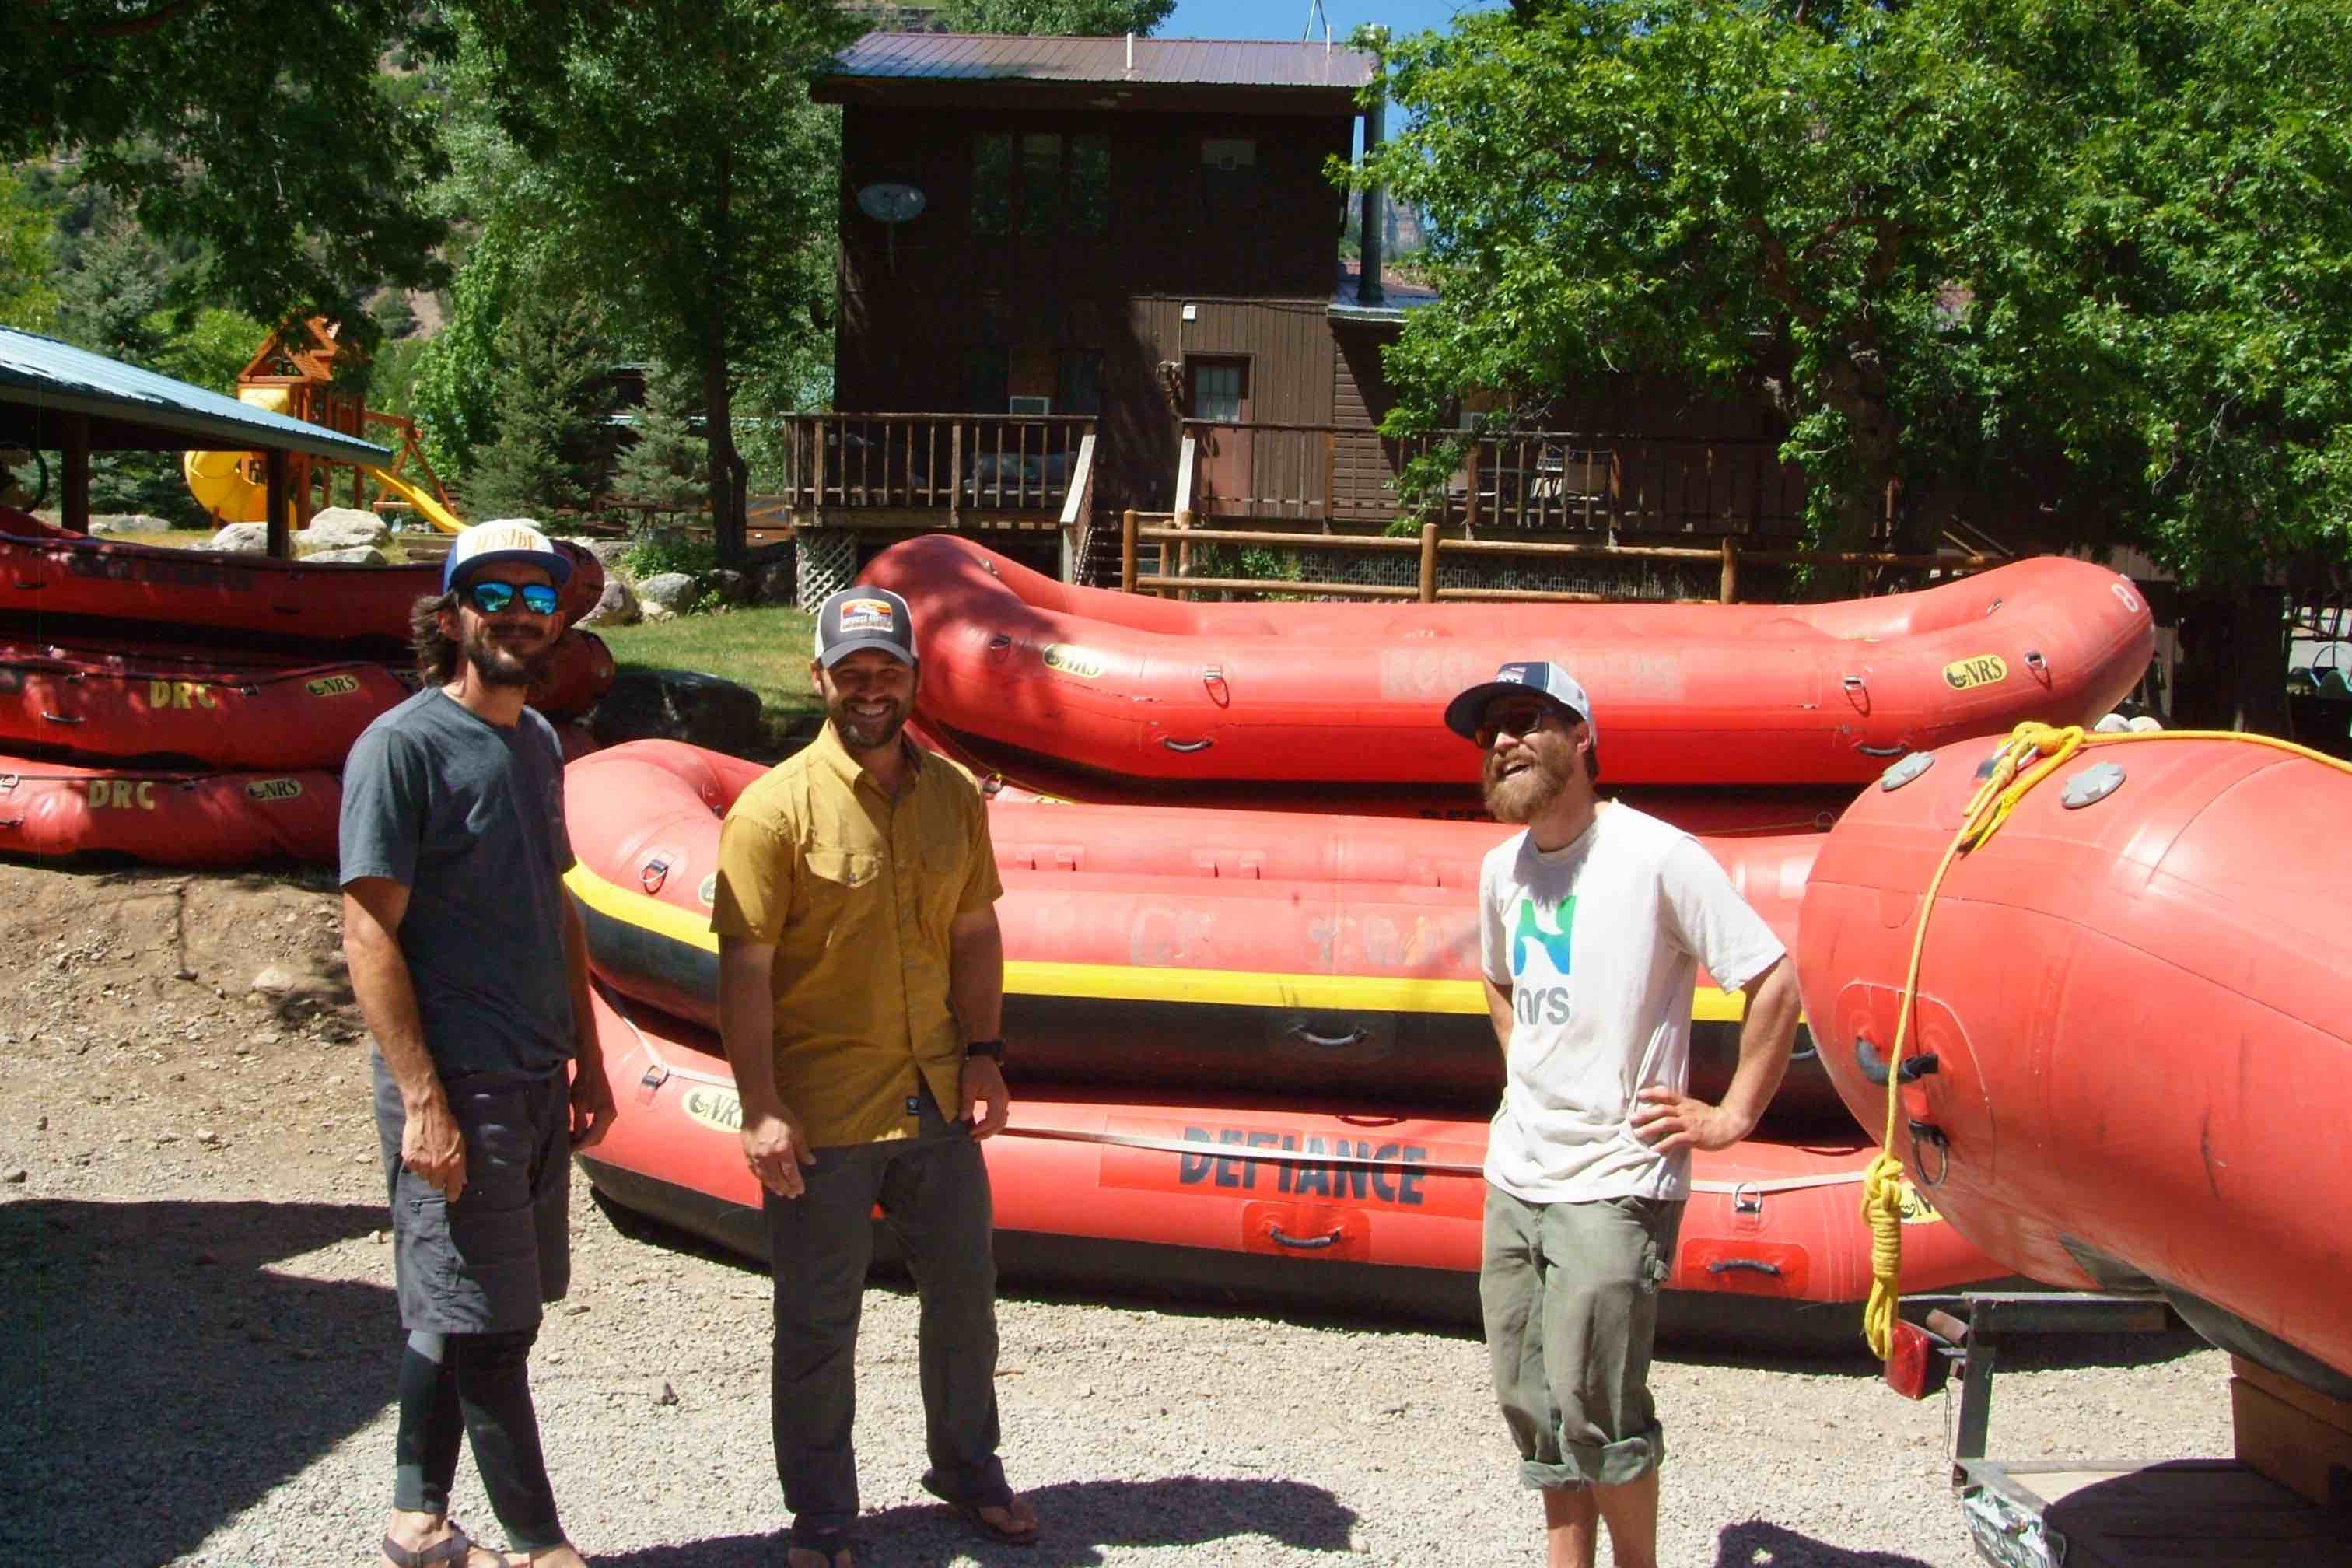 L-R: Jeremy Comeau, Gregory Cowen and Jamie Linstrum are the owners and operators of Defiance Rafting in Glenwood Caynon, CO. (Not Shown, Heather Cowen).